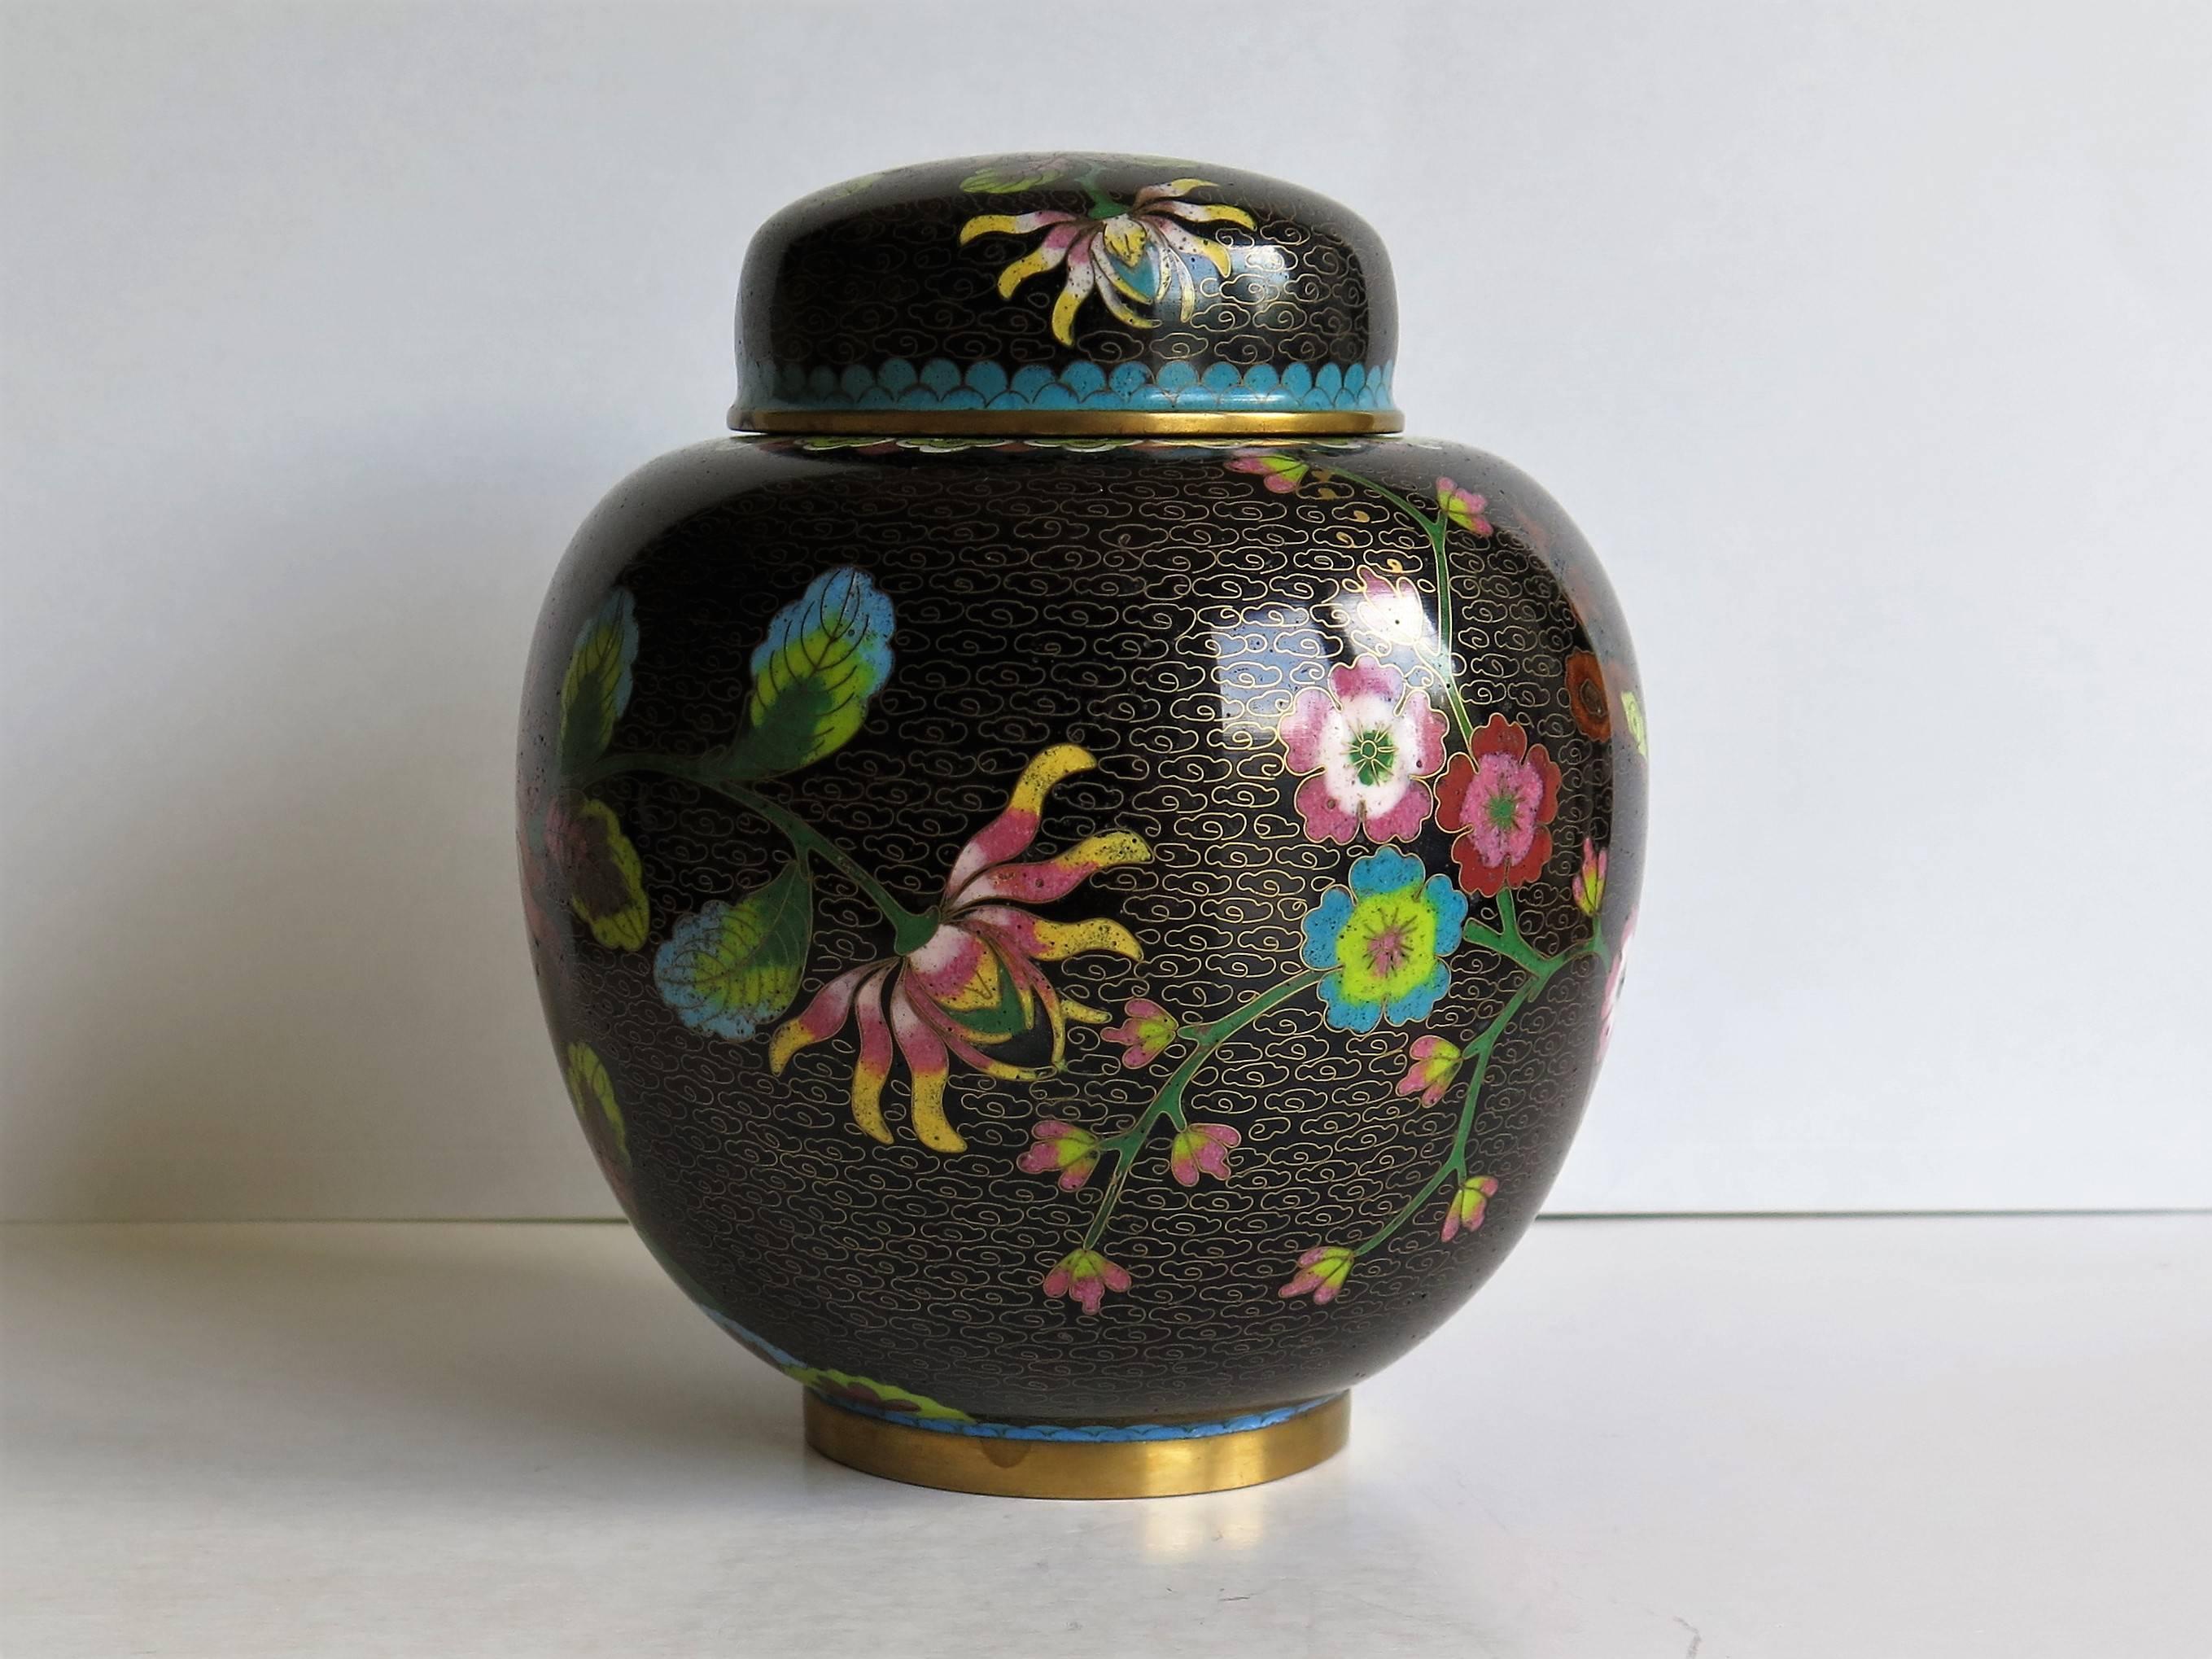 This is a very decorative cloisonné lidded jar or ginger jar, made in China in the late 19th century.

The jar has a curved ovoid shape raised on a short foot. It is beautifully made of bronze with rich colorful enamels, set into a black